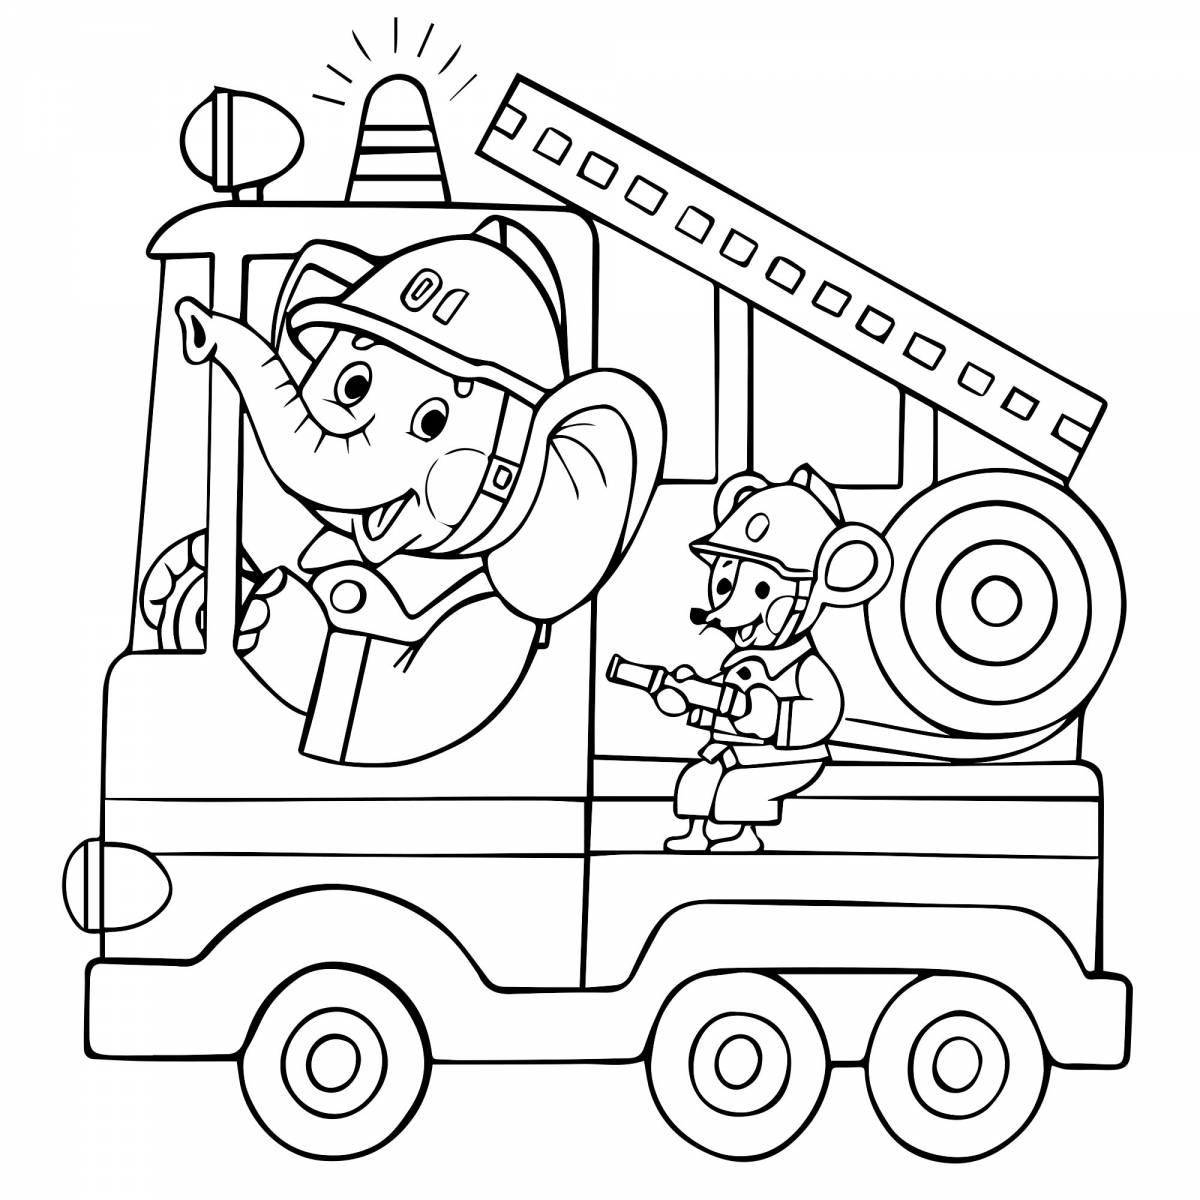 Tempting fire safety coloring page